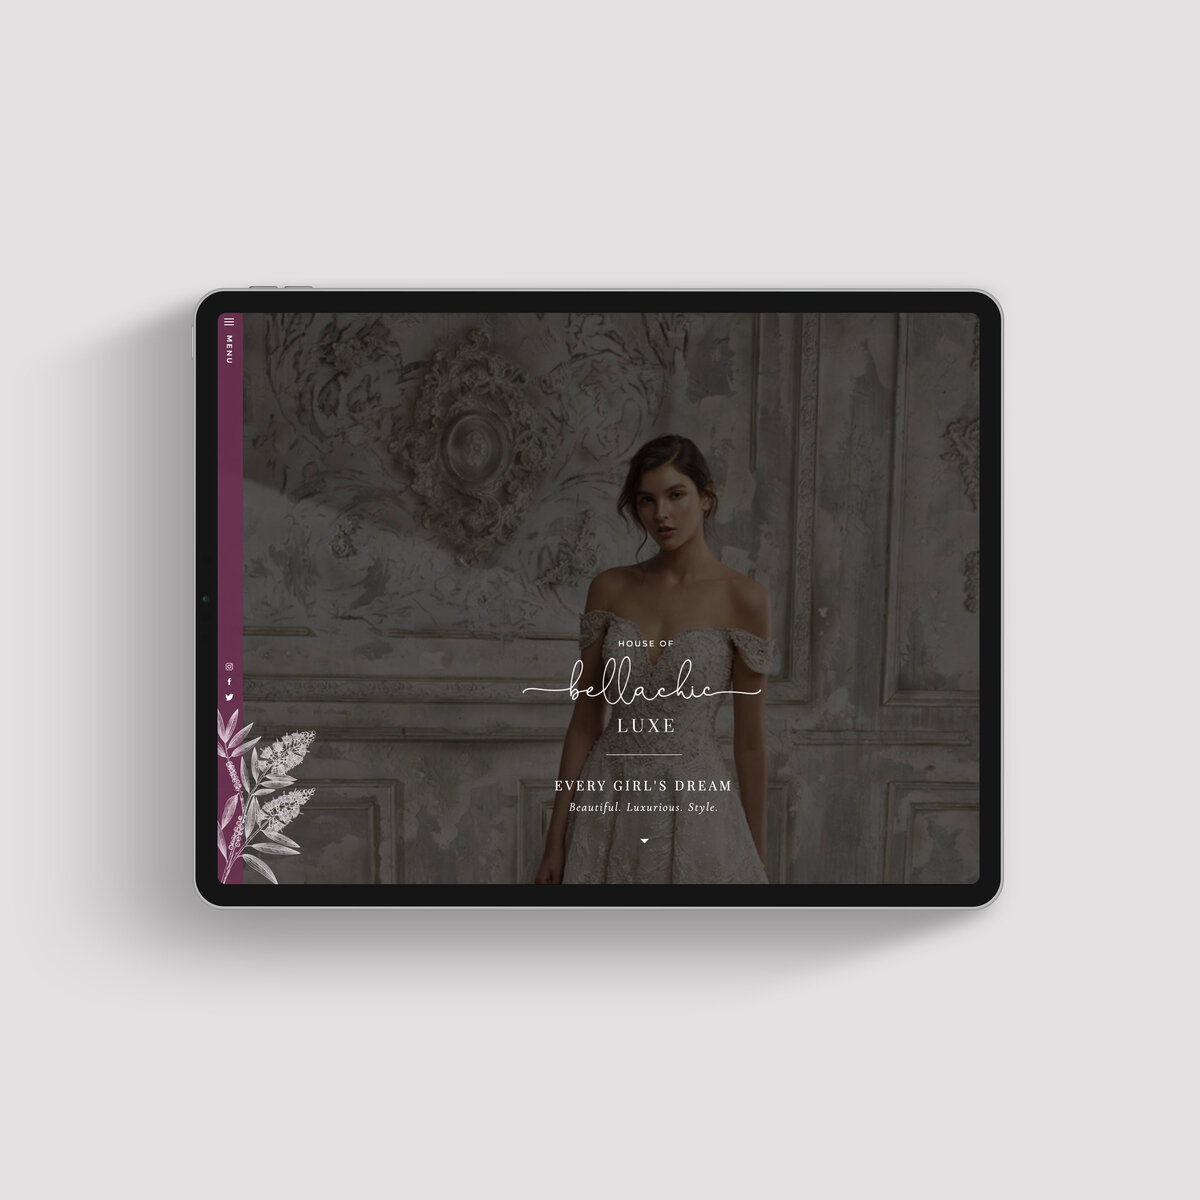 Experience the delicate beauty of custom web design as a wedding event planner's website, adorned with intricate floral details, shines on an iPad screen.